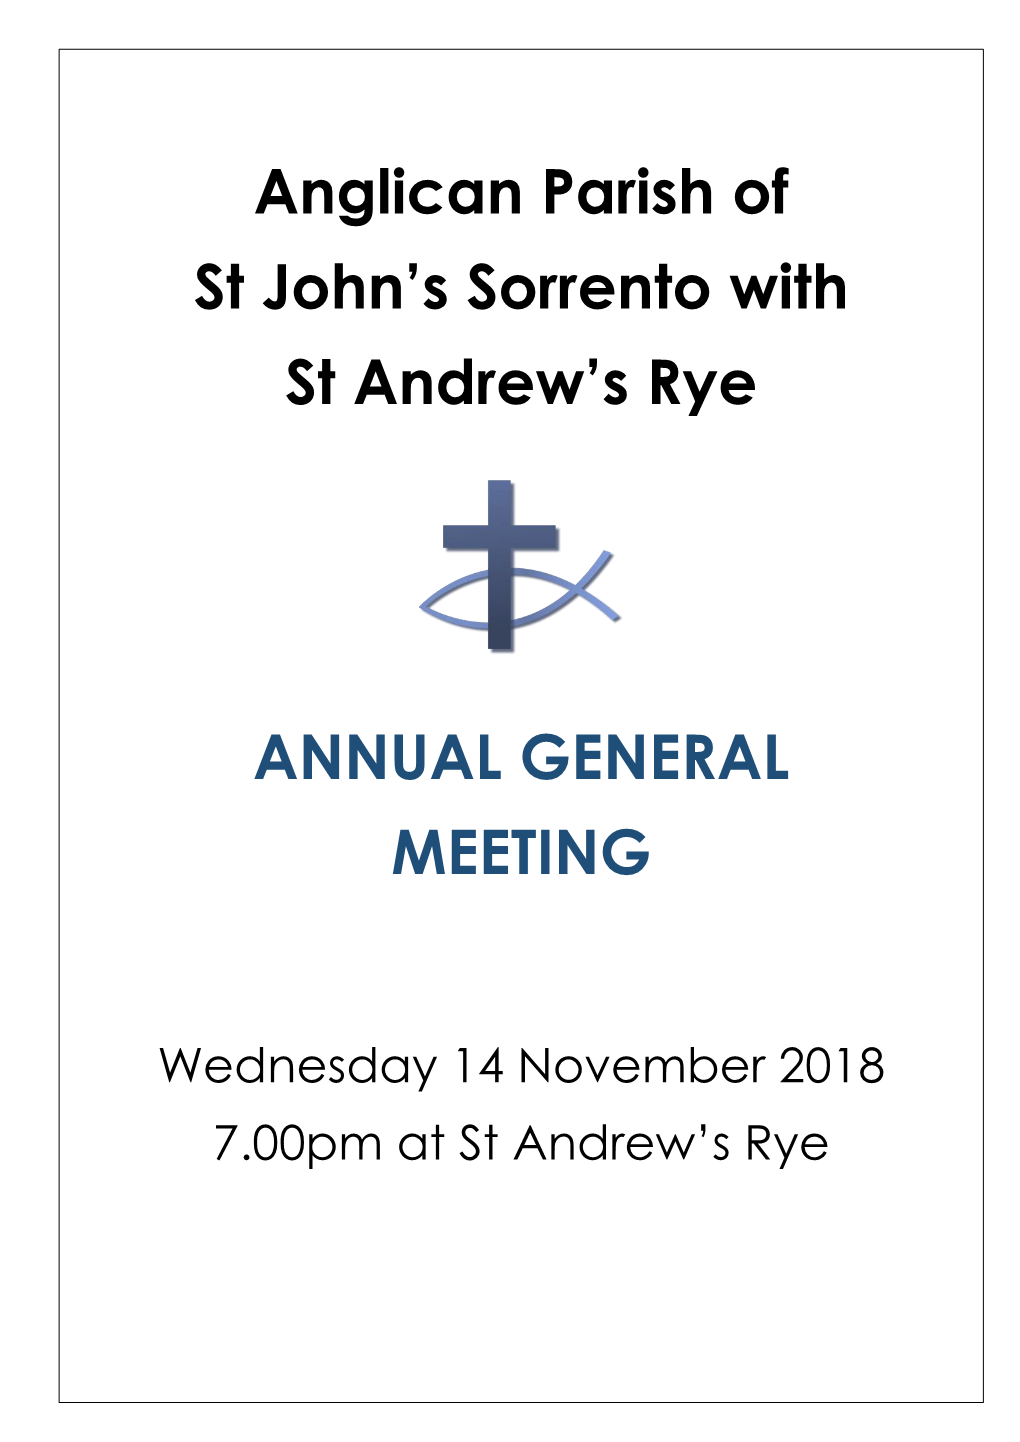 Anglican Parish of St John's Sorrento with St Andrew's Rye ANNUAL